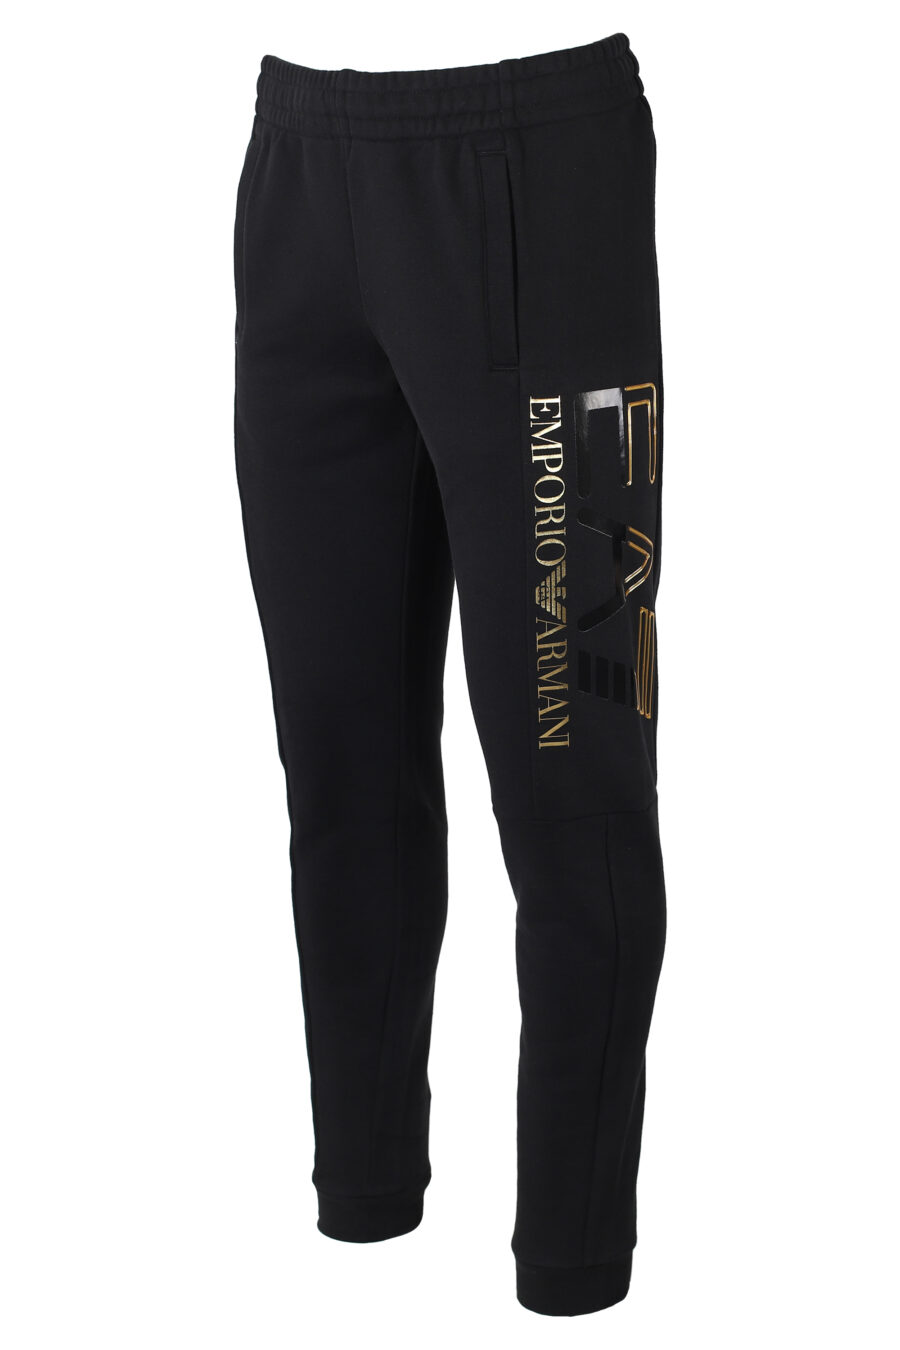 Tracksuit bottoms black with two-tone maxi logo on the side - IMG 9882